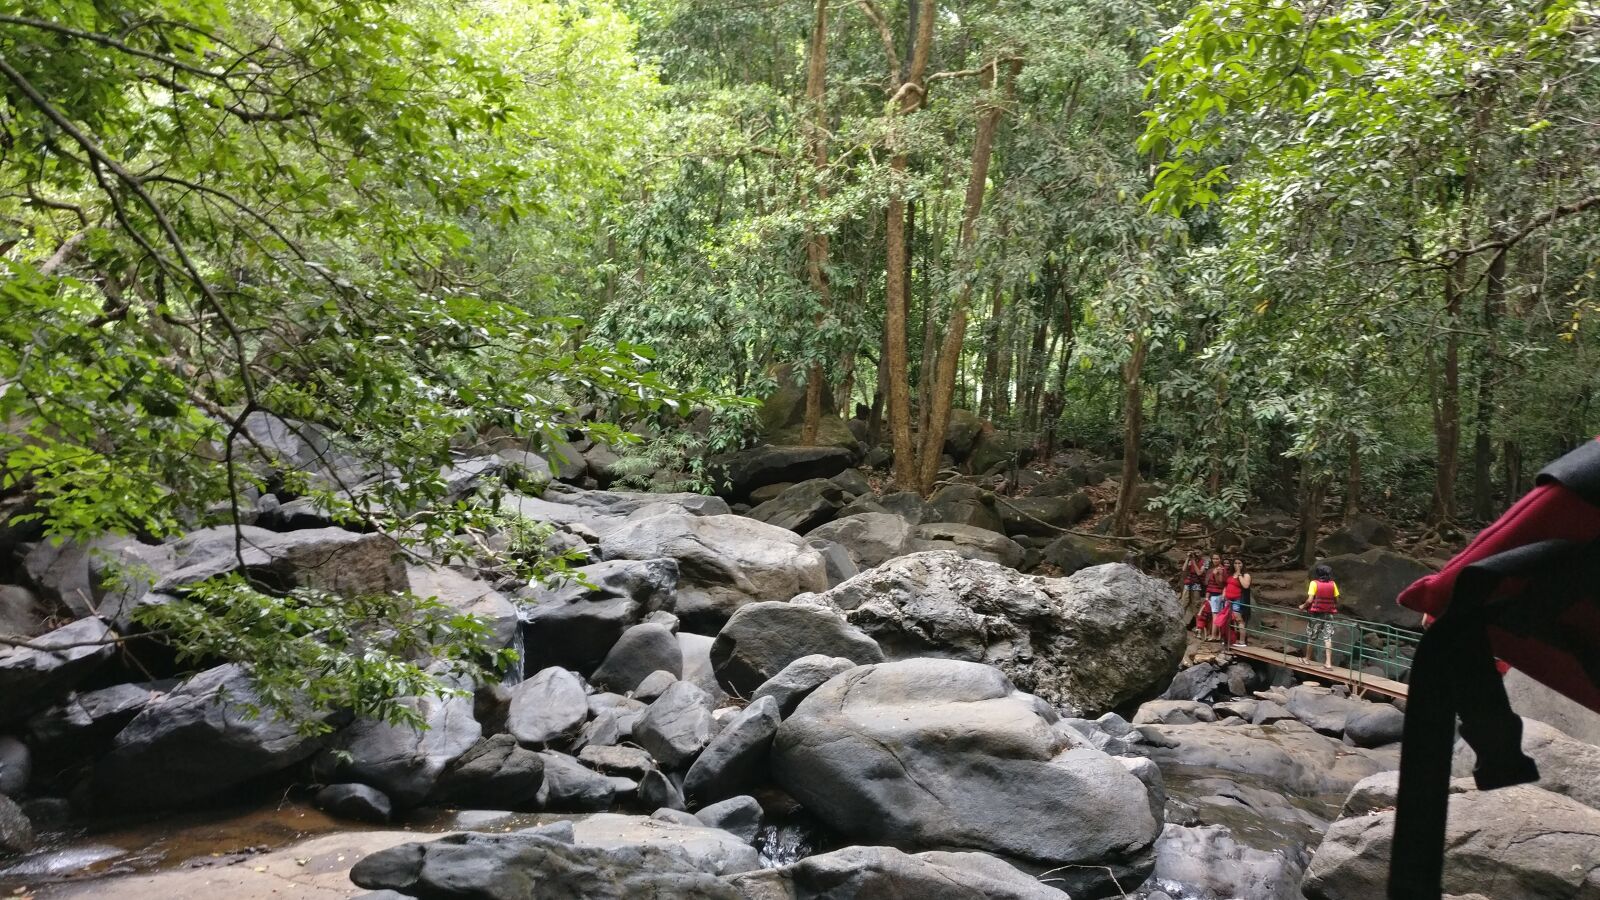 OnePlus A3003 sample photo. Forest, tracking, goa photography